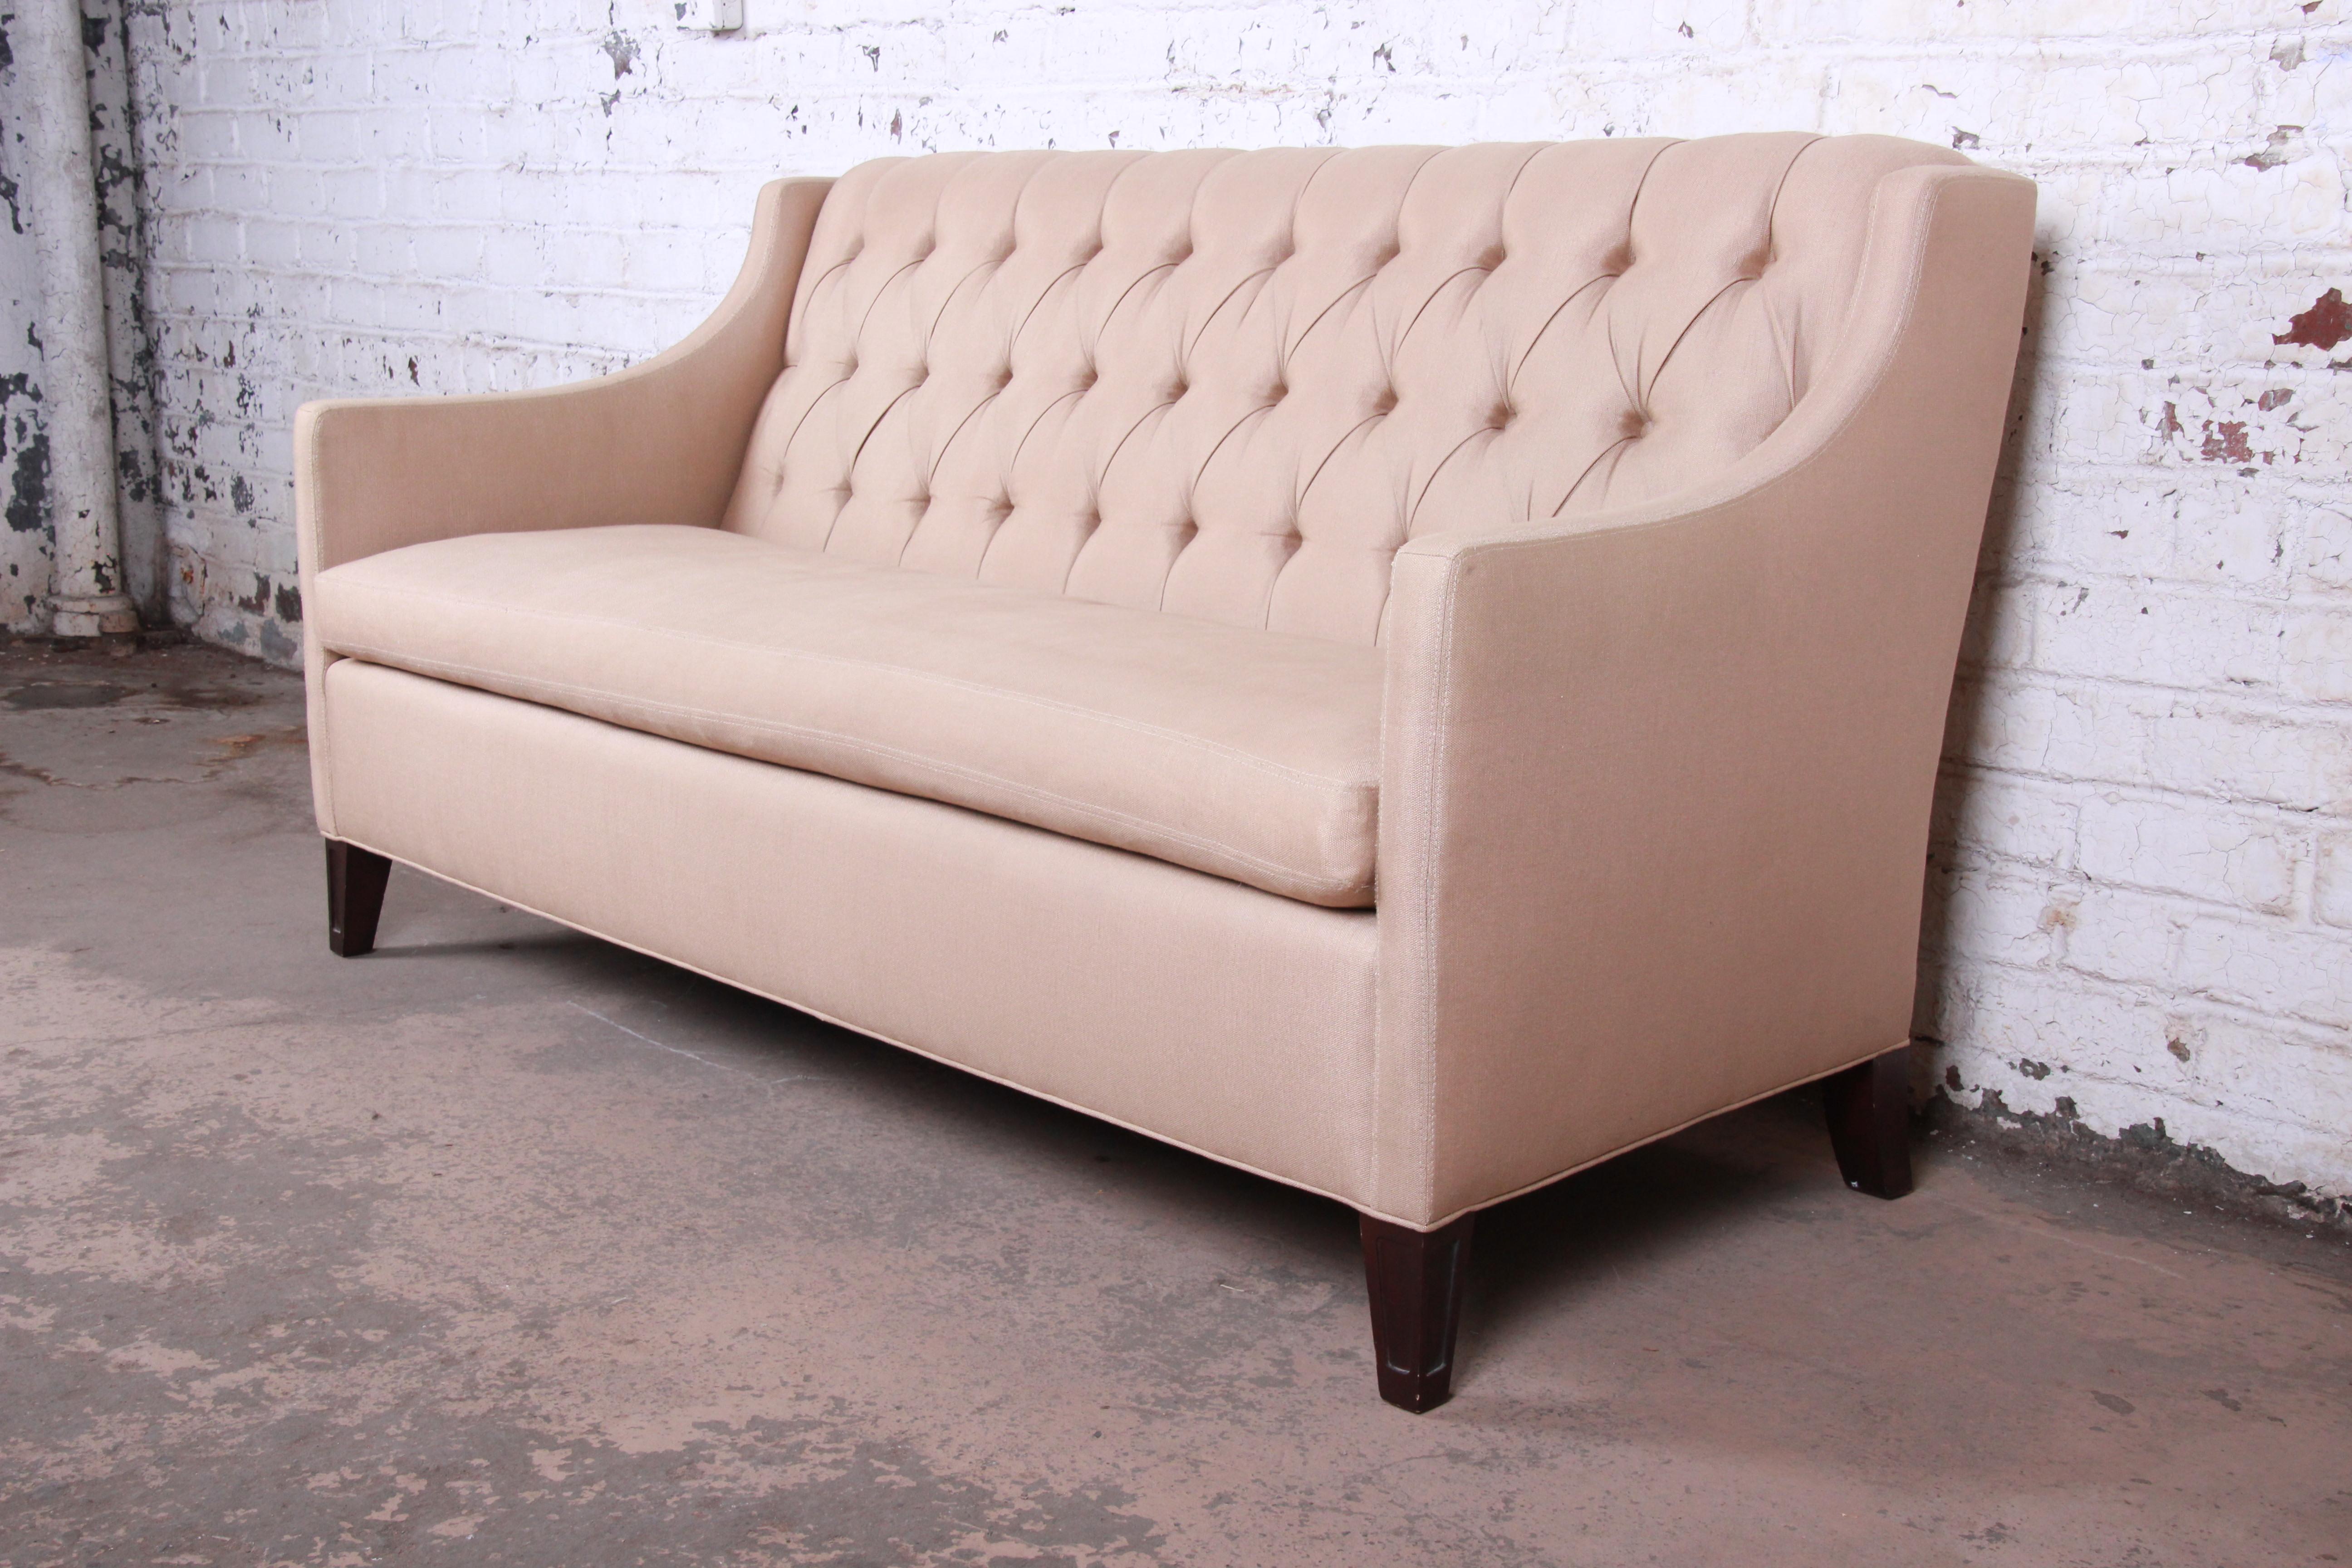 A gorgeous modern tufted sofa with tan upholstery

By Henredon 